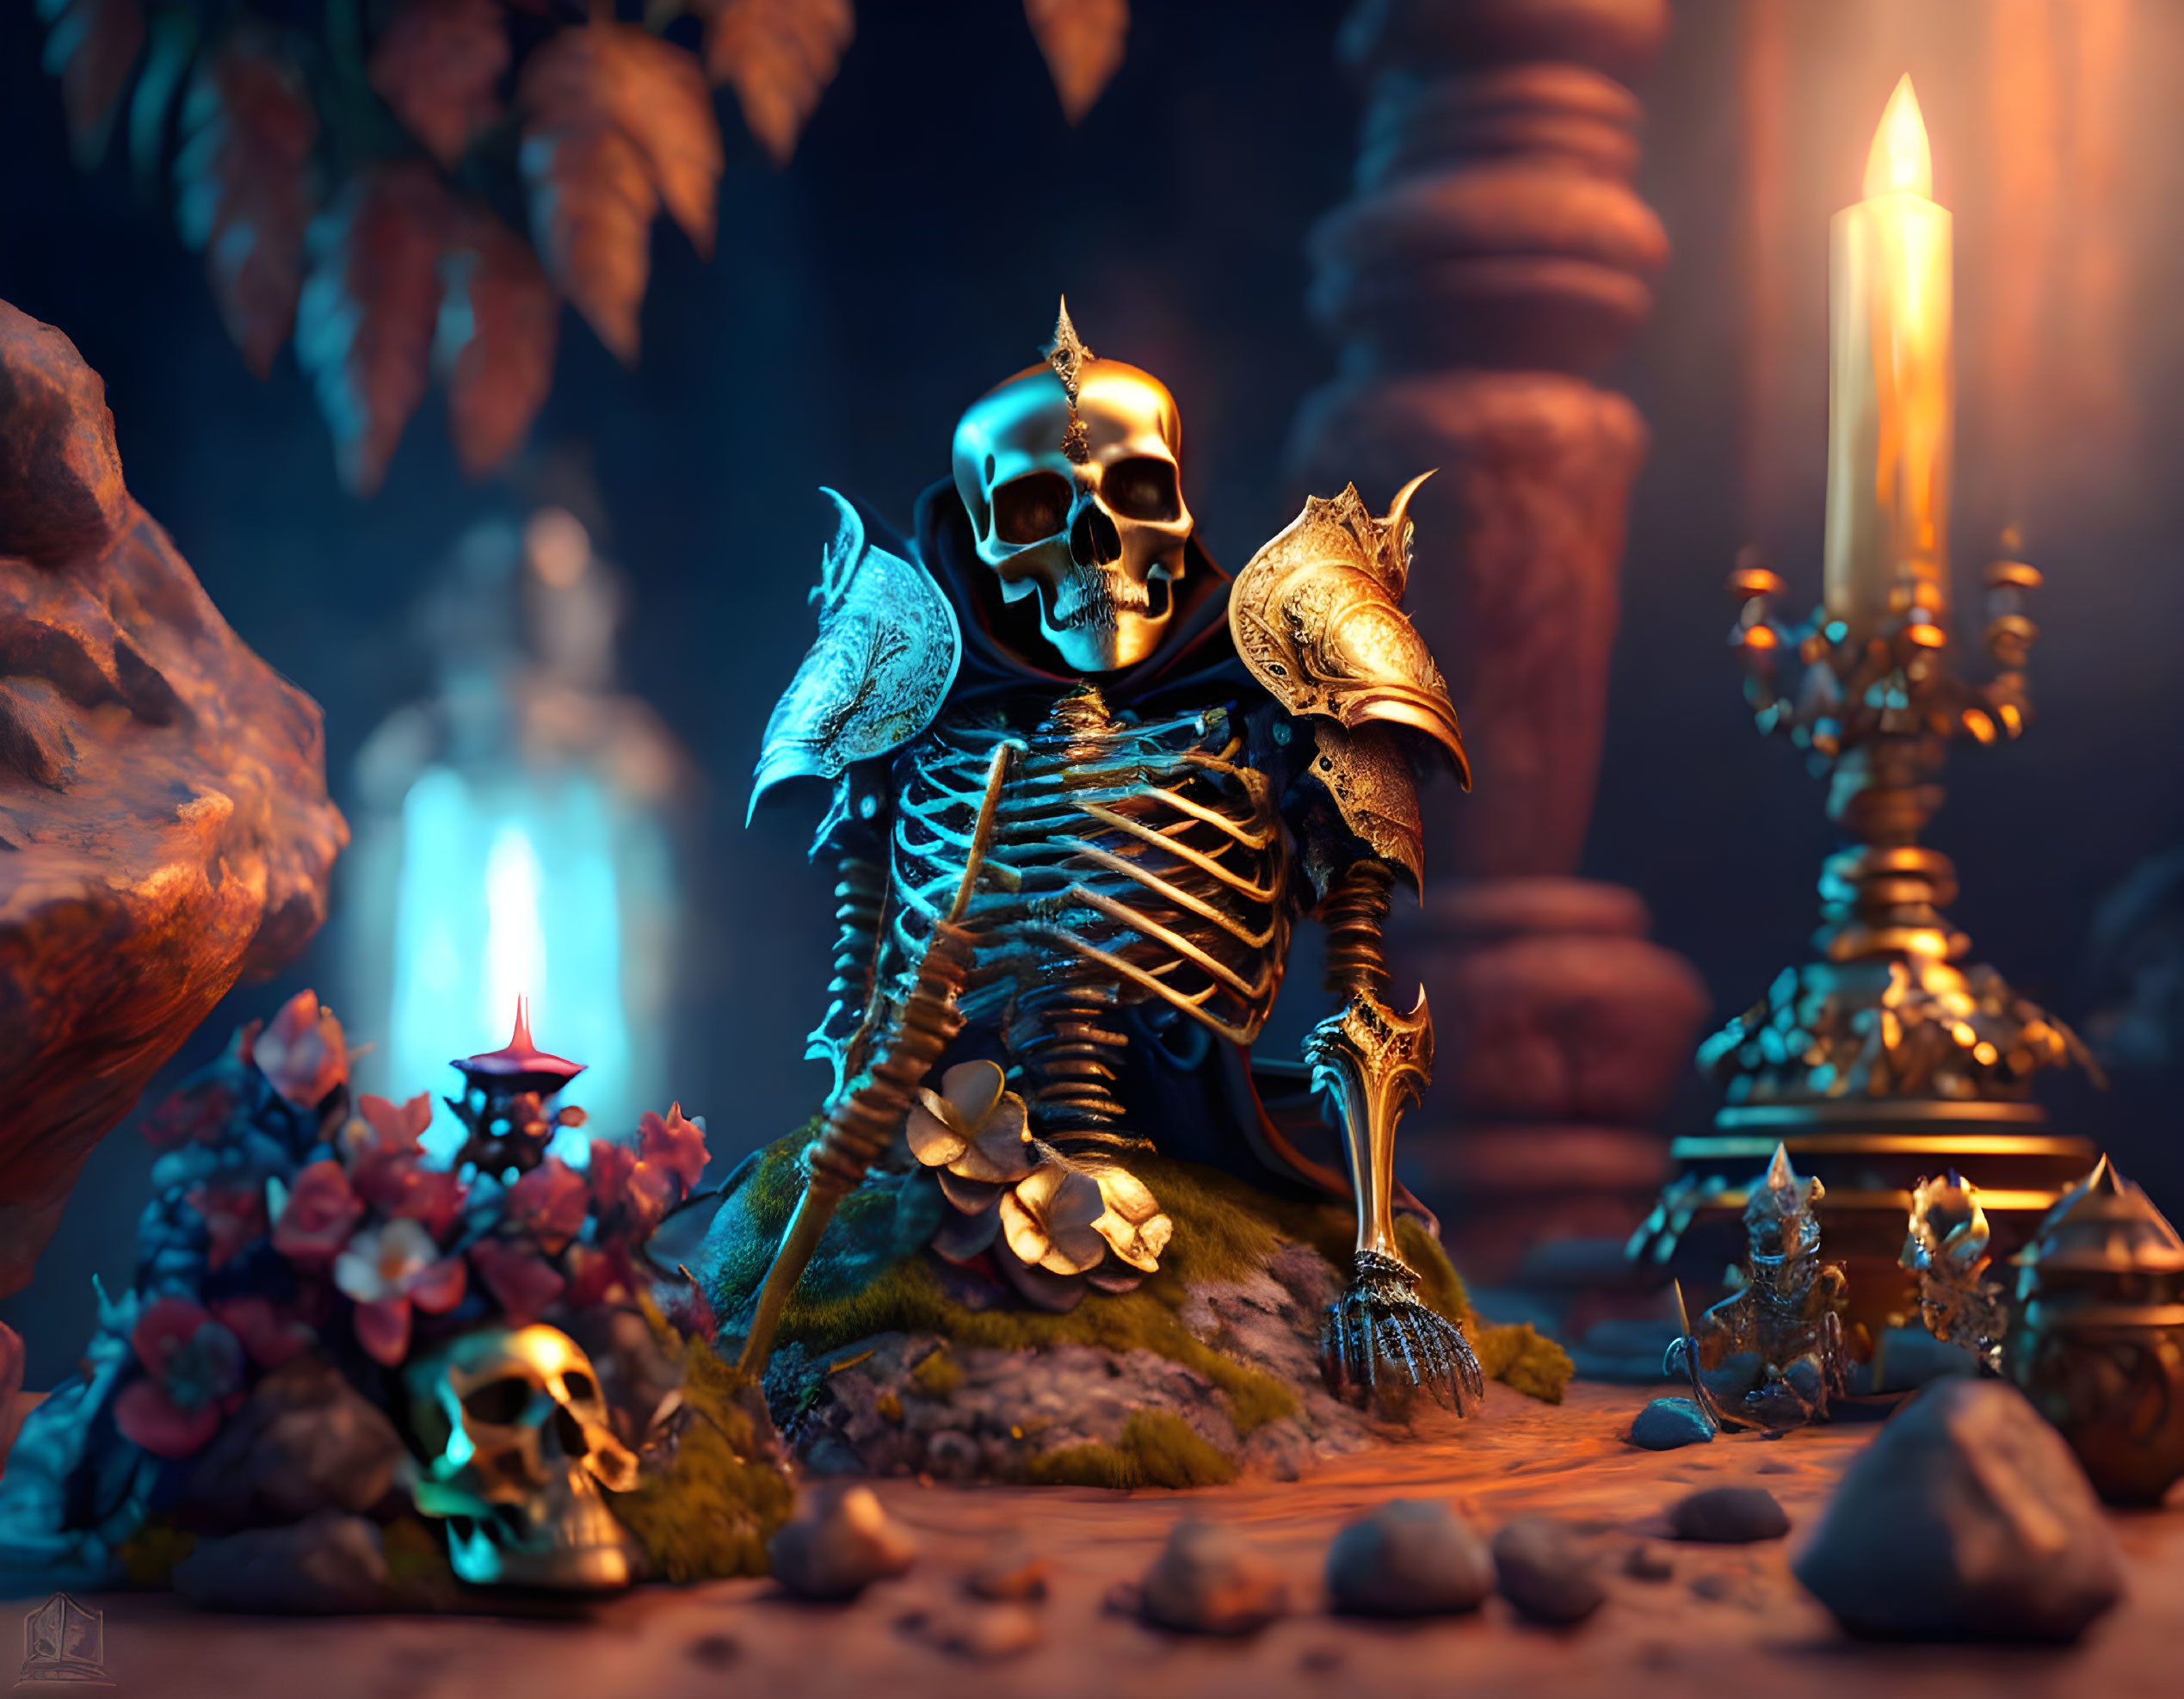 Skeletal figure with scepter, candles, skulls, and foliage in dim setting